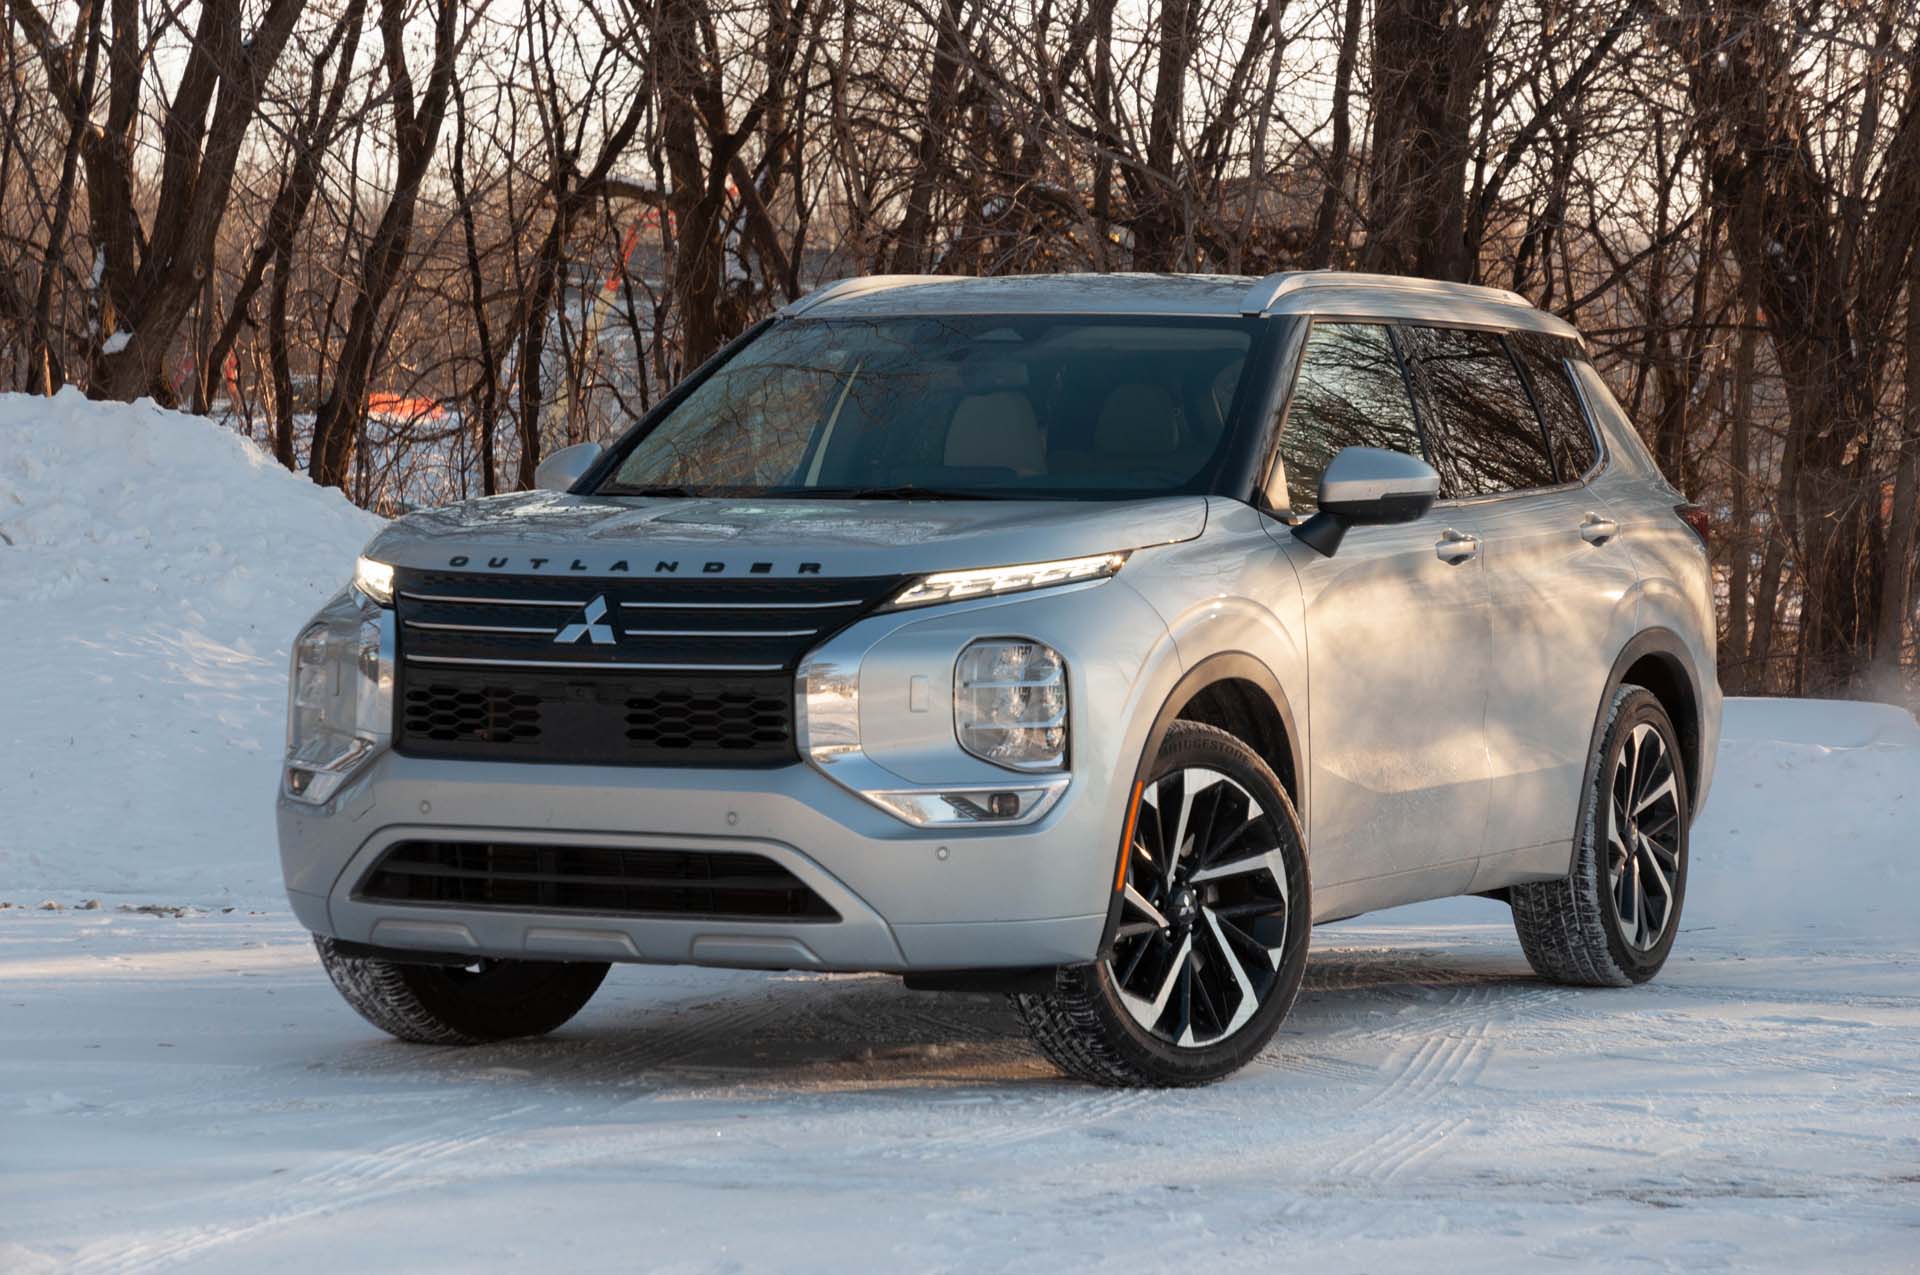 2022 Mitsubishi Outlander delivers throwback SUV vibes in trendy crossover physique